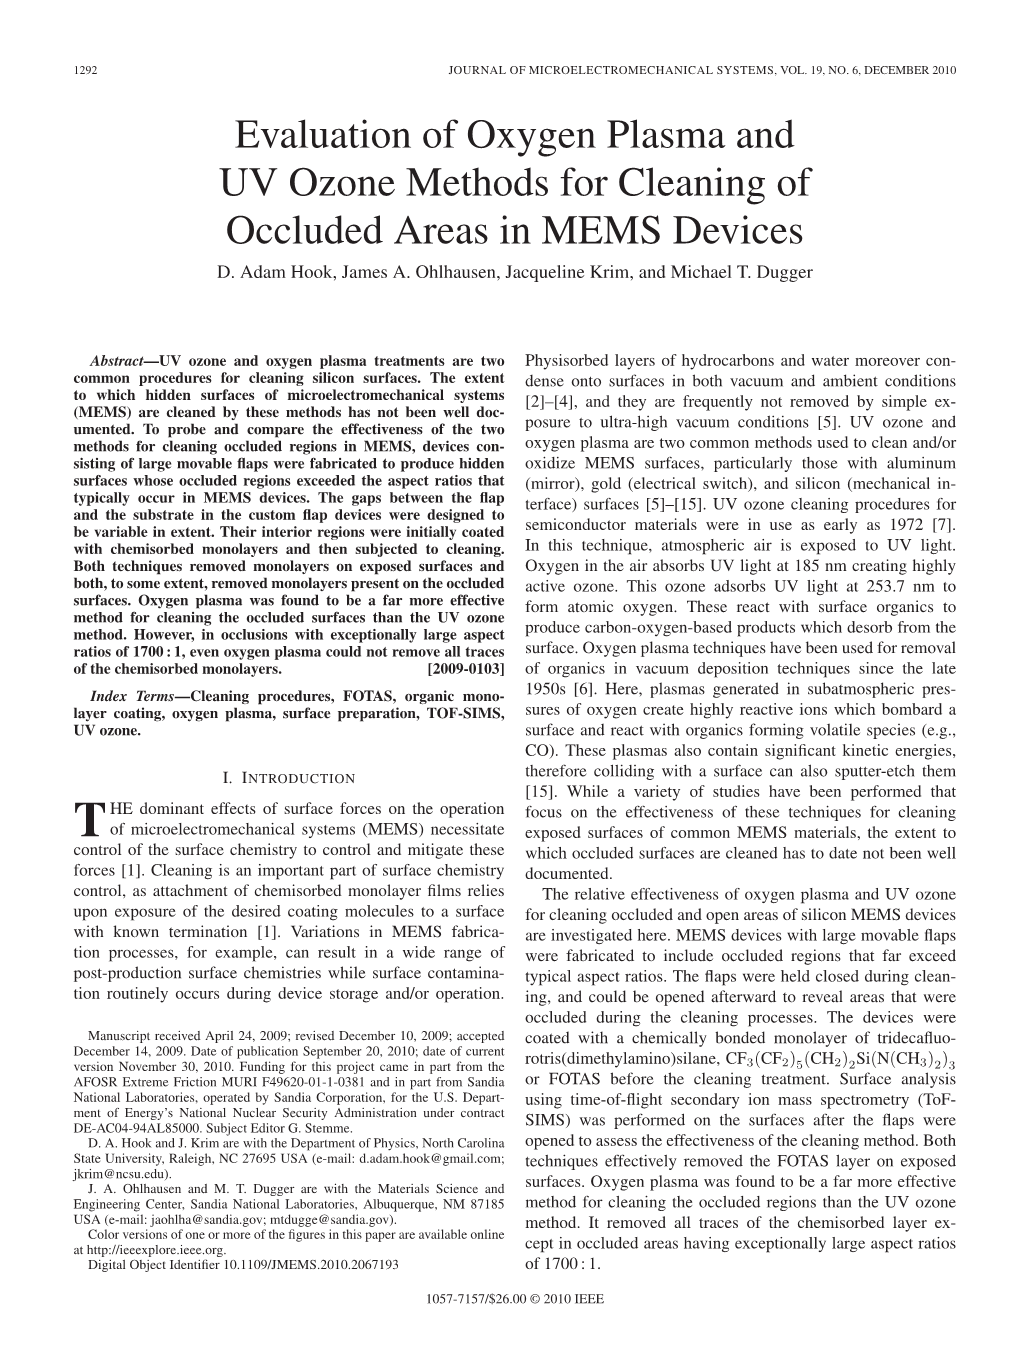 Evaluation of Oxygen Plasma and UV Ozone Methods for Cleaning of Occluded Areas in MEMS Devices D